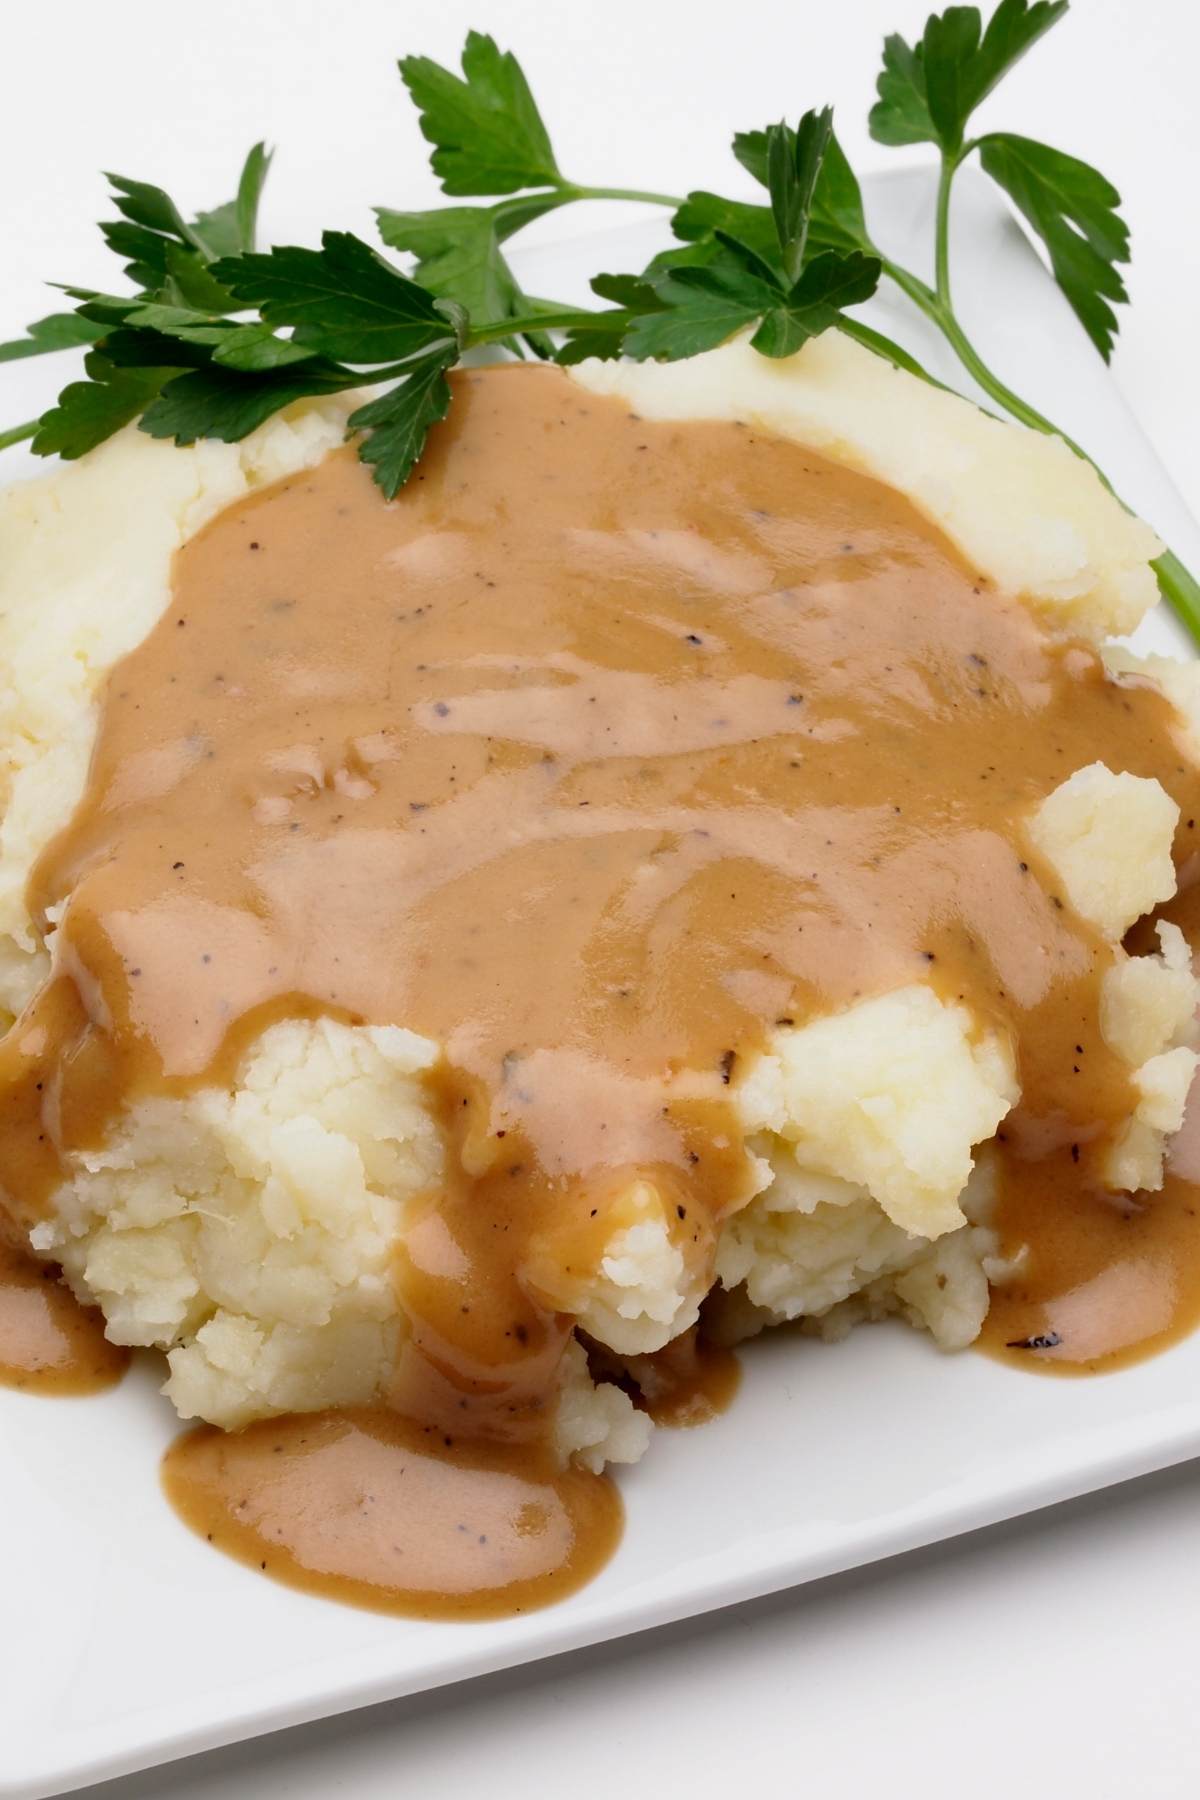 Use the drippings from roast pork to make this delicious Pork Gravy! It’s super easy, and you’ll love the rich and savory flavors.